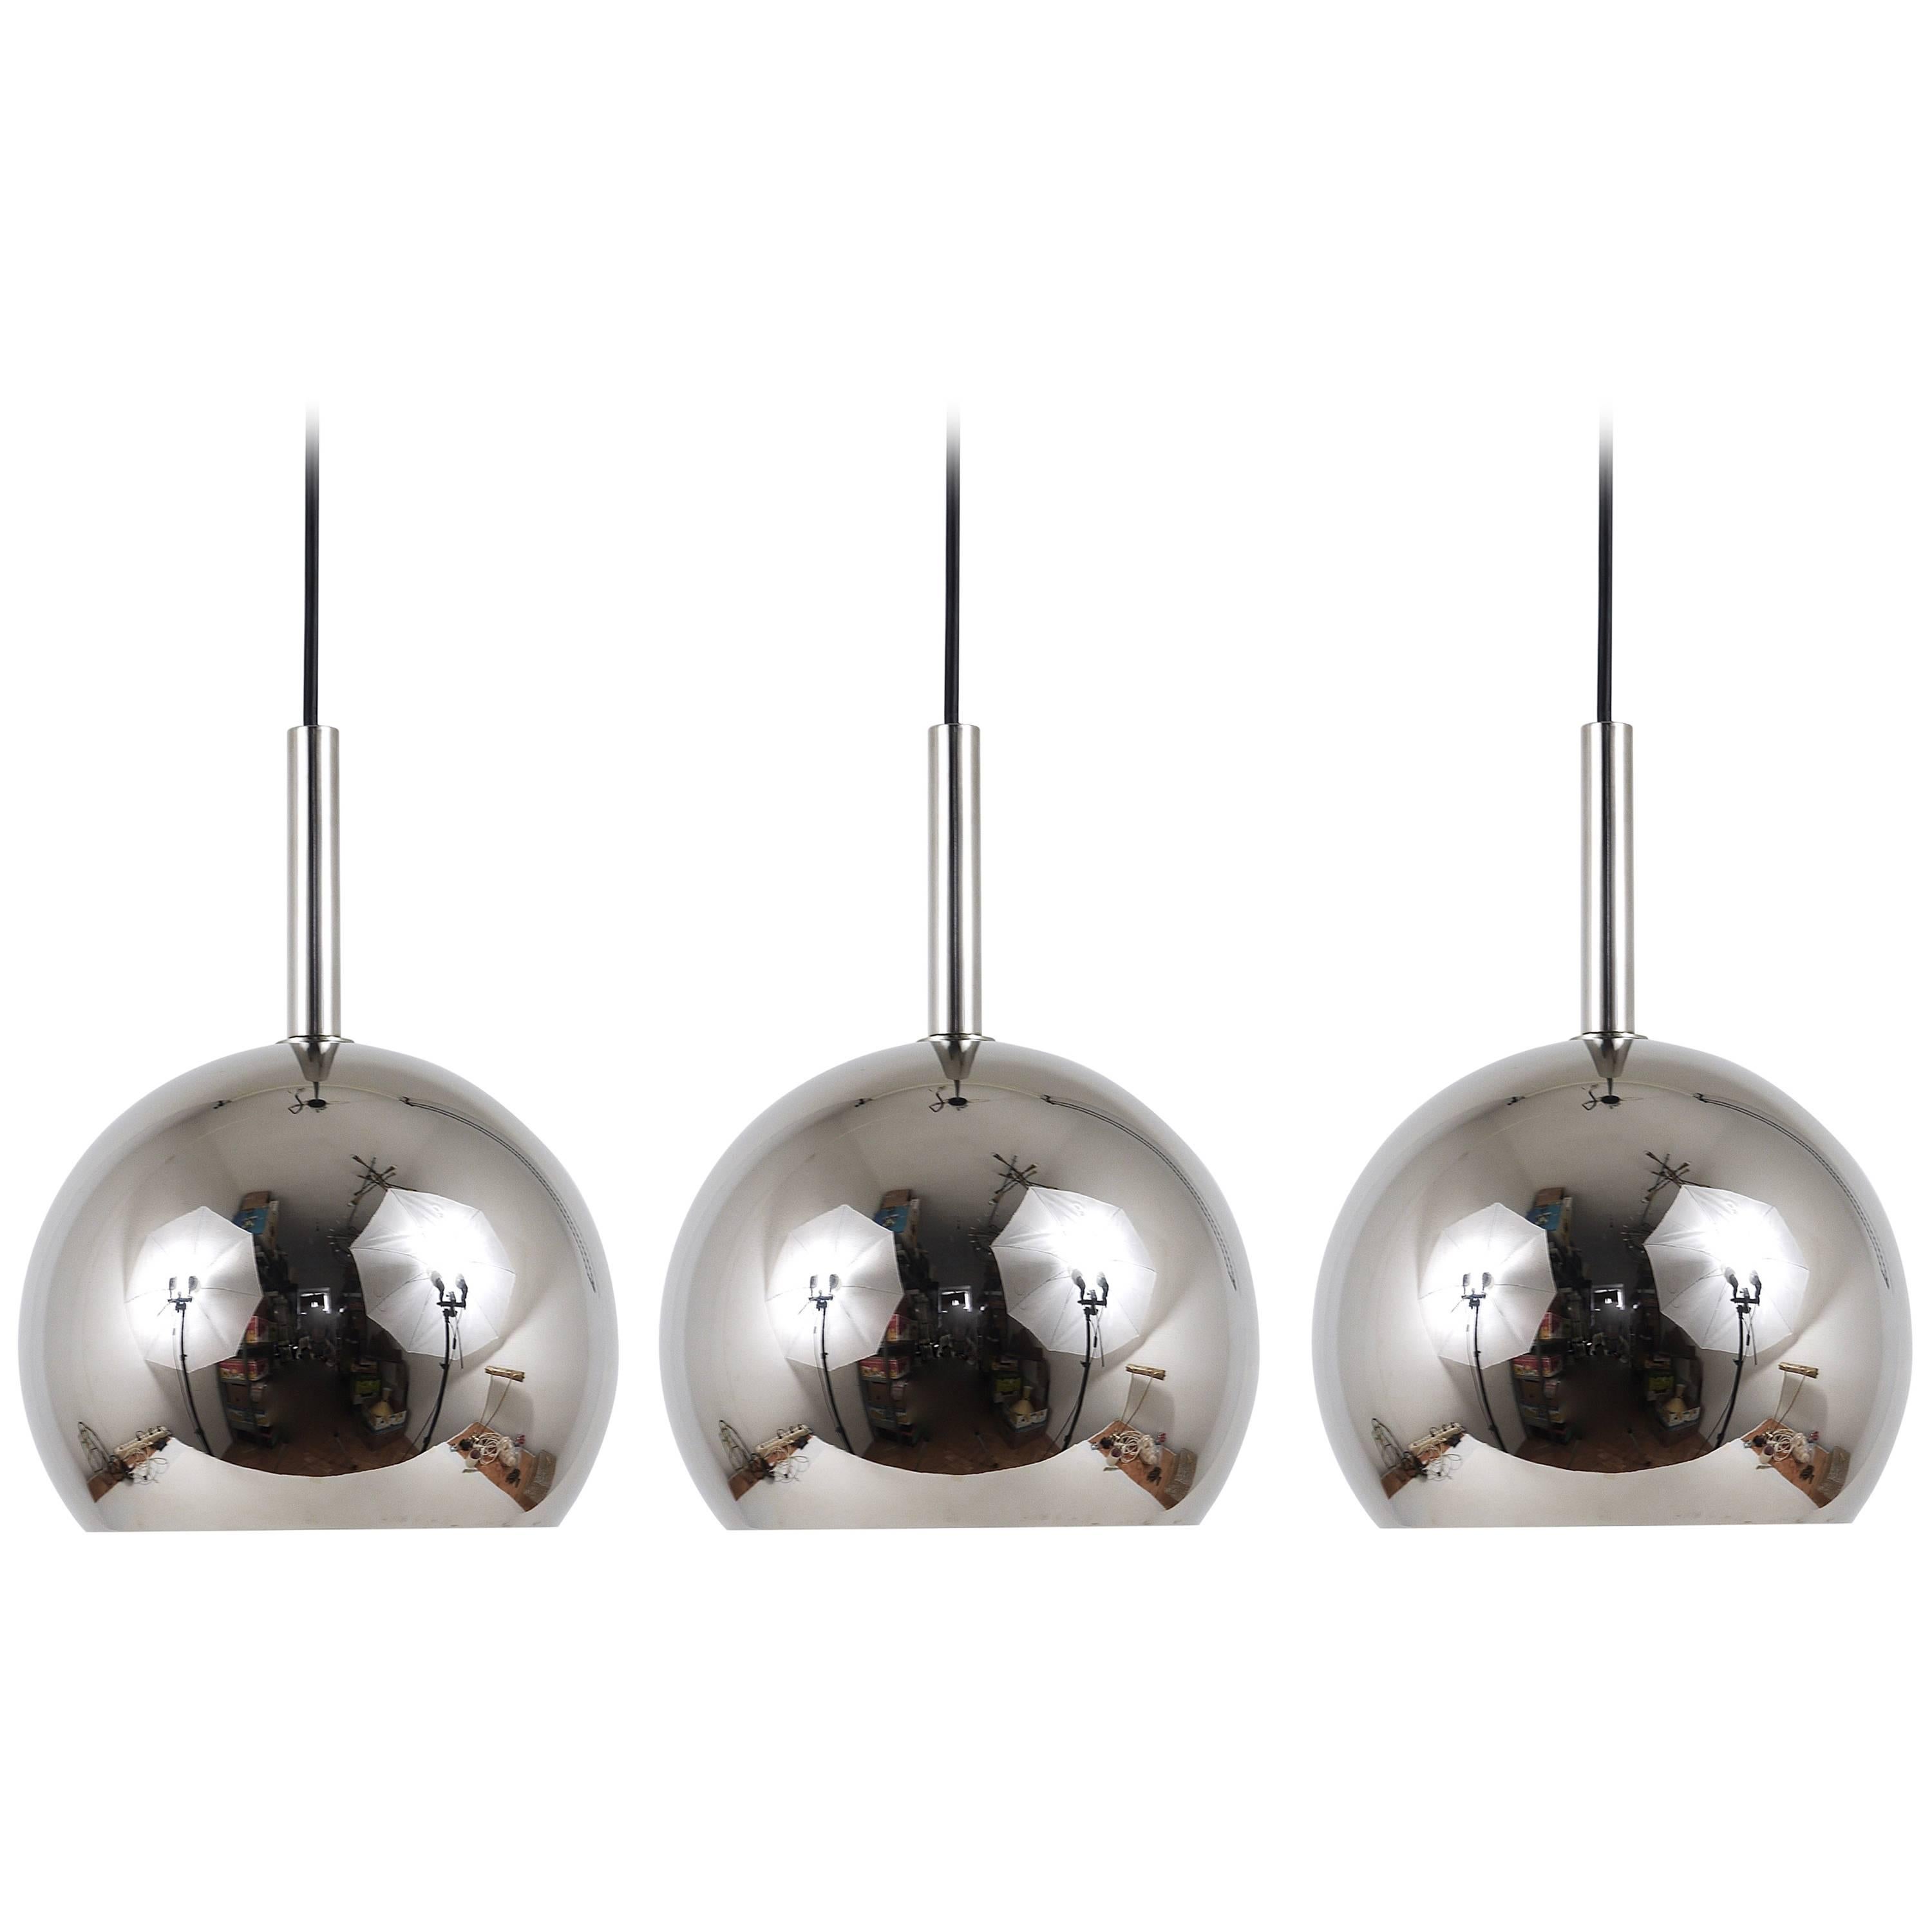 Up to three beautiful chrome-plated metal Space Age globe ceiling lights. Manufactured by Hoffmeister Germany in the 1970s. In very good condition. Three lamps are available, can be sold separately, the price is per piece. The globes have a diameter